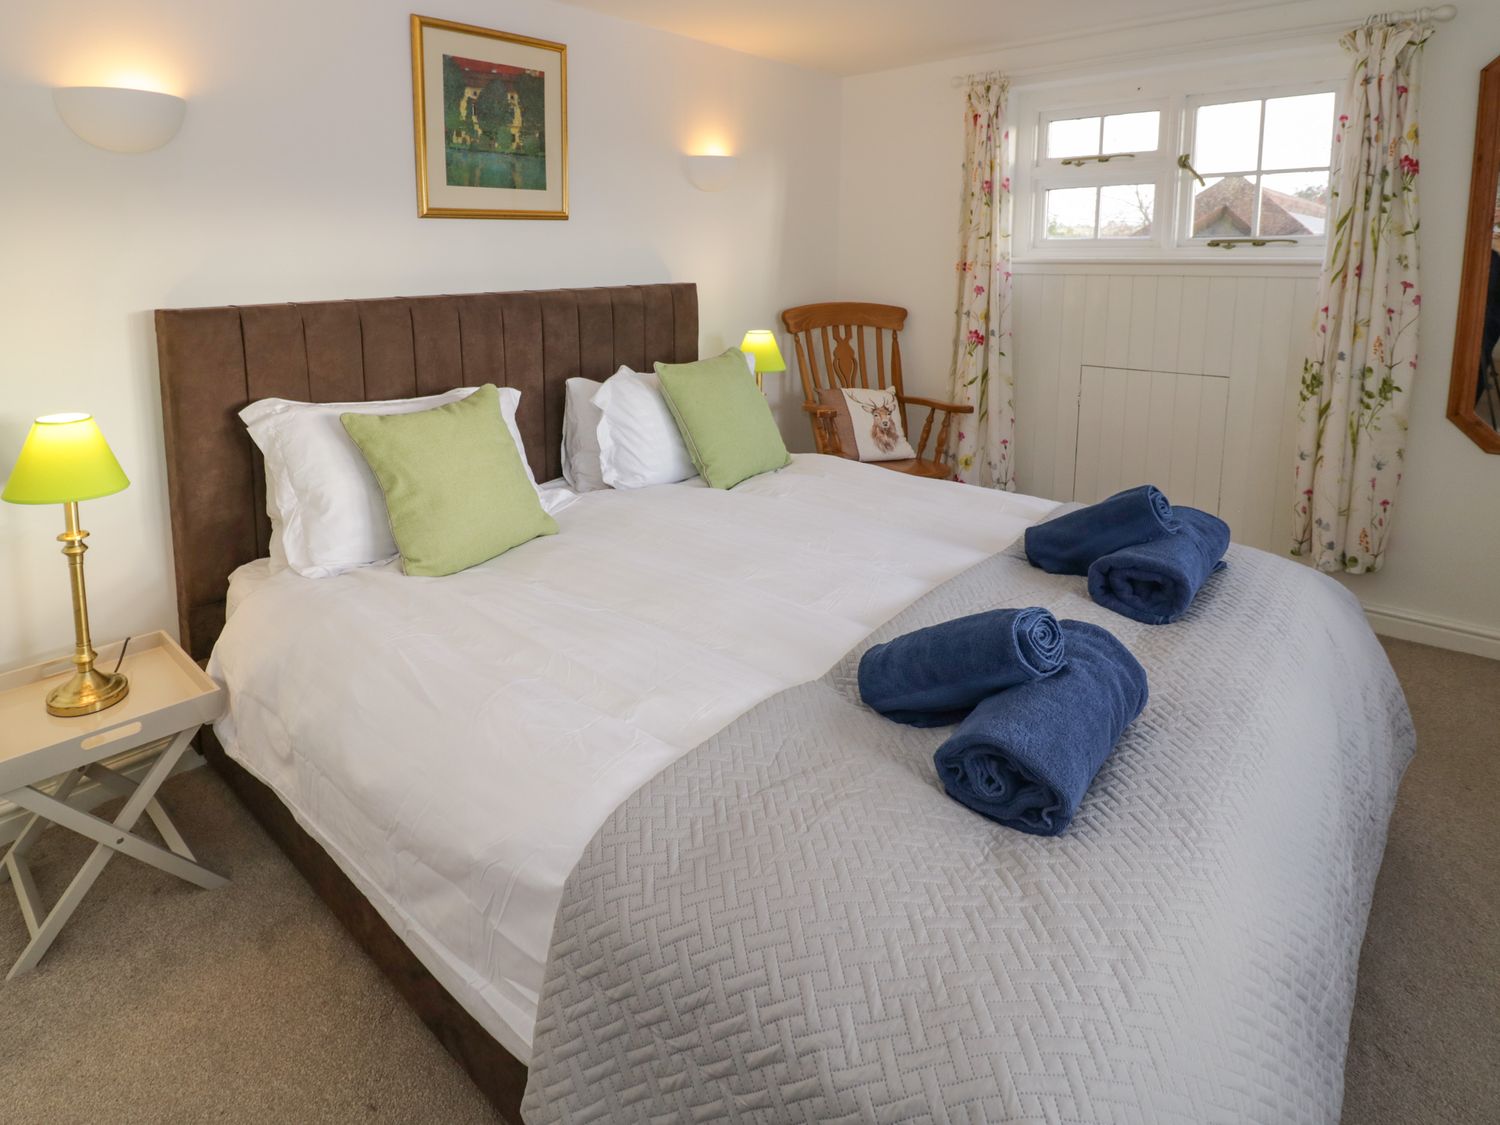 Home Farm Cottage in Stockton, Warwickshire. Six-bedroom home with hot tub and games room. Near shop